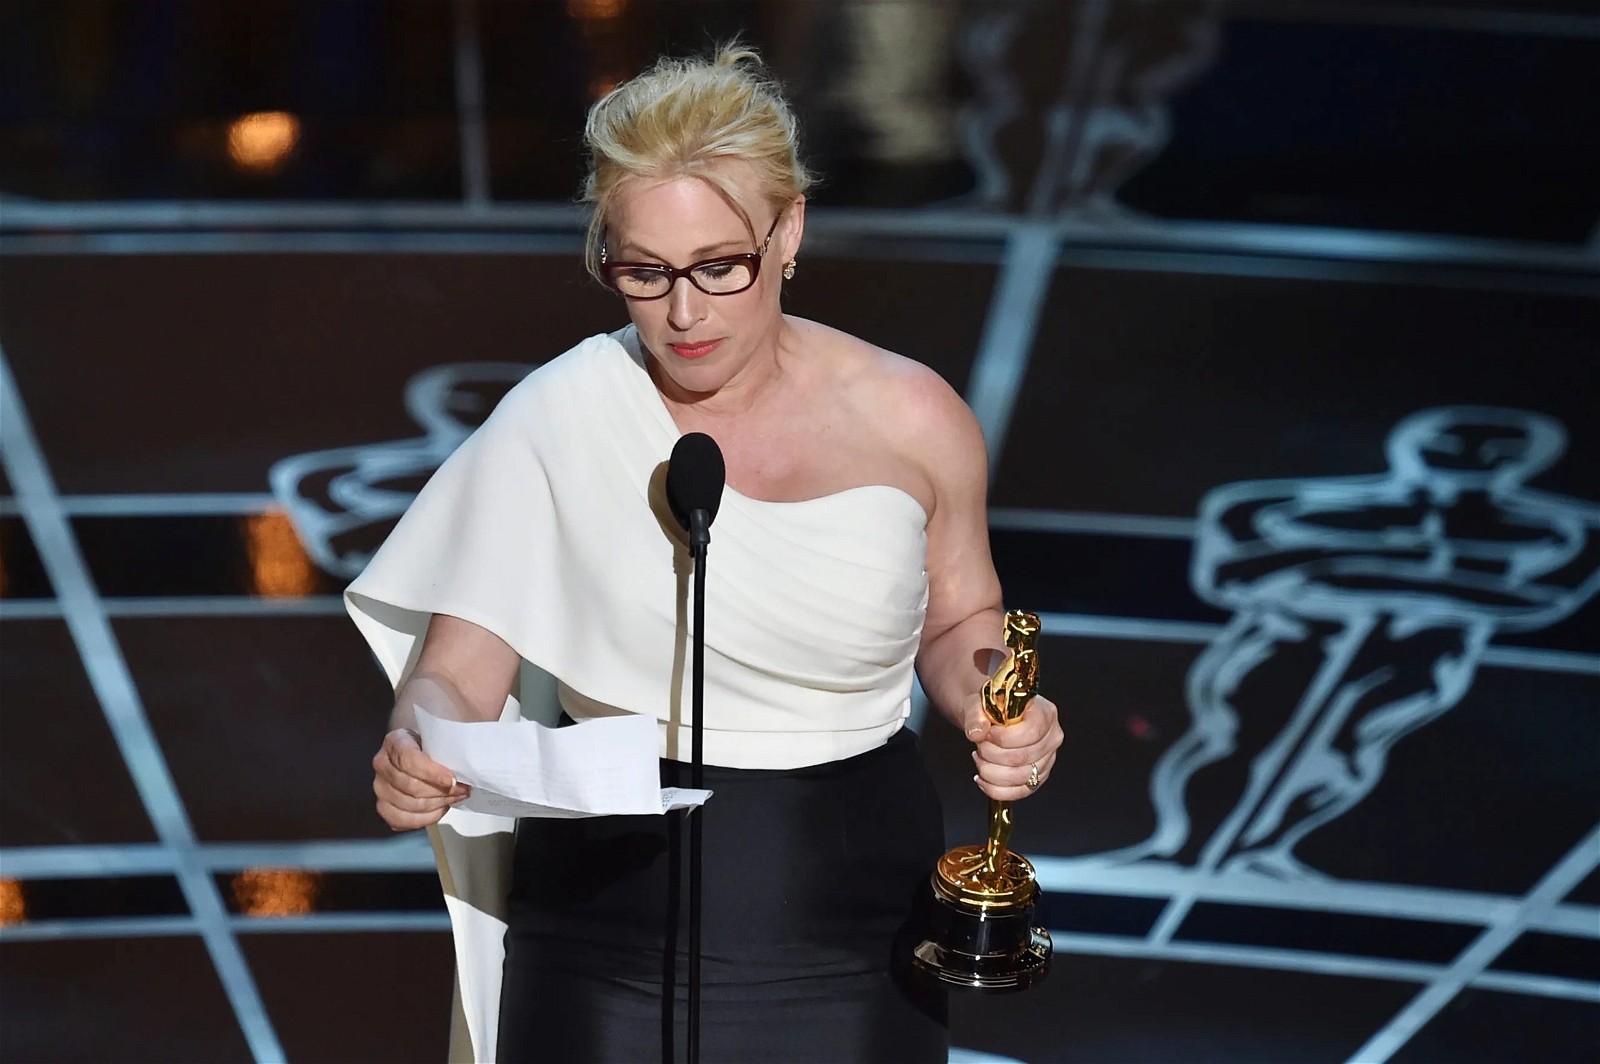 Patricia Arquette wins Best Supporting Actress in 2015